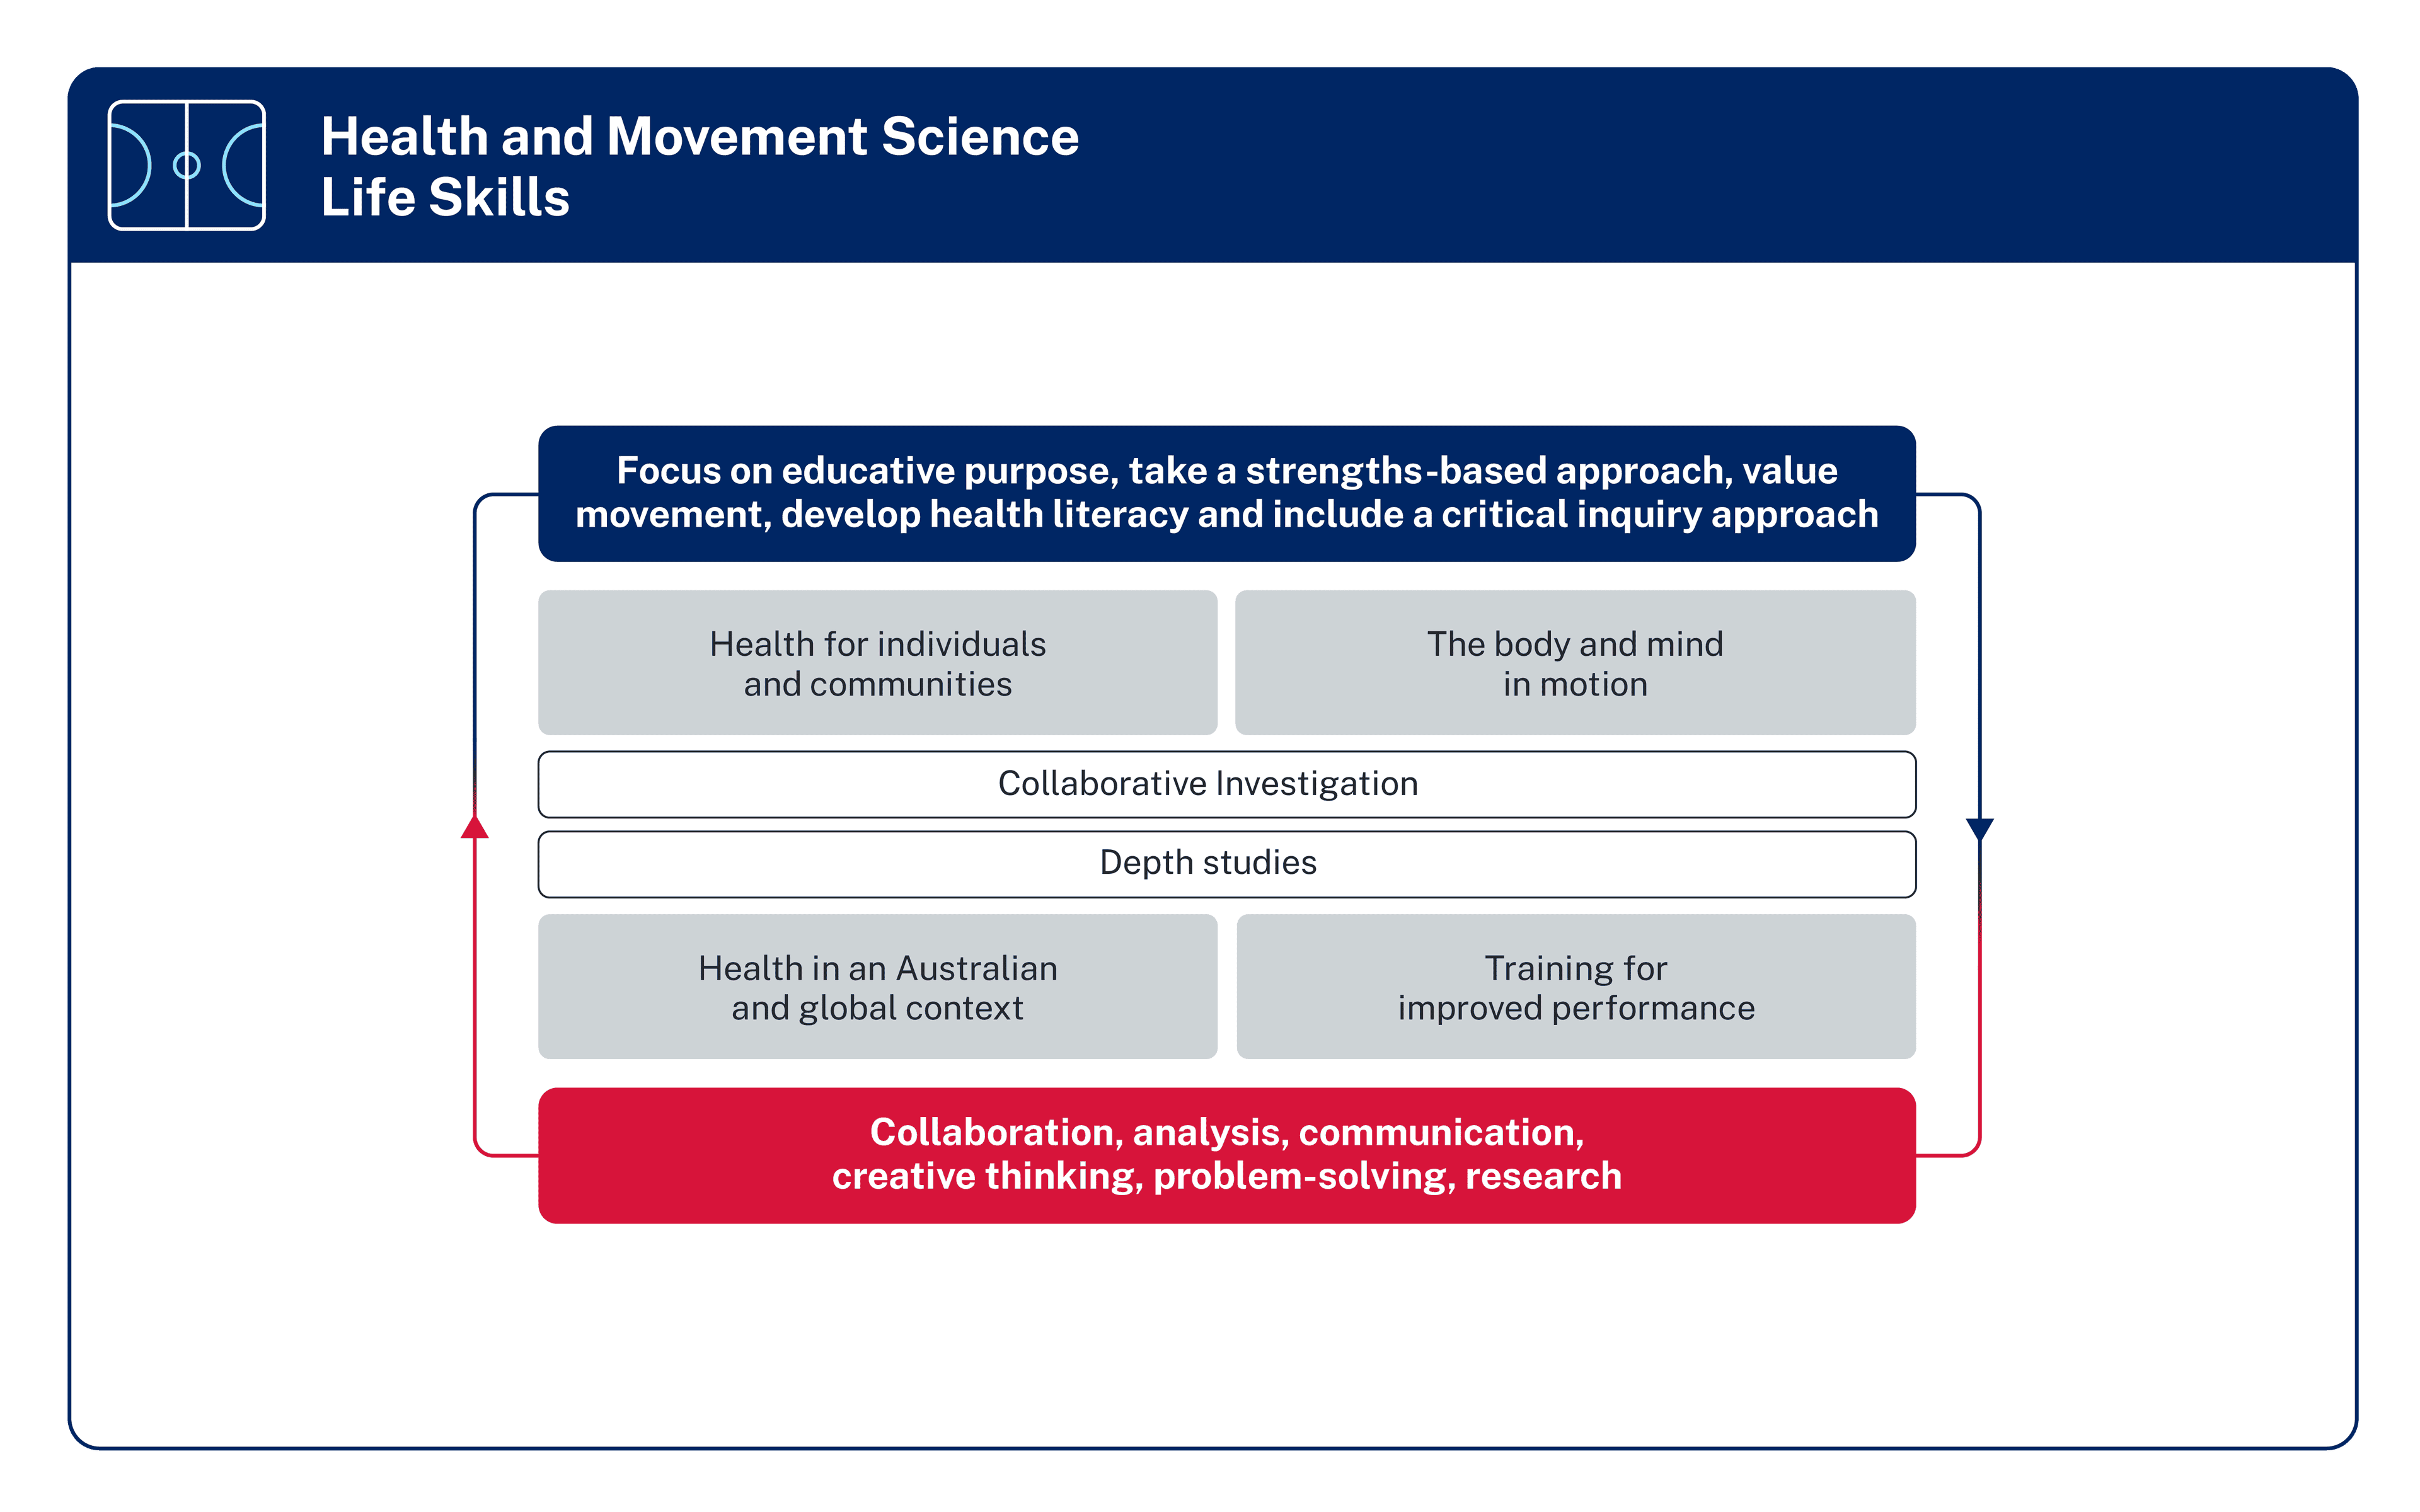 Focus areas and skills for Health and Movement Science Life Skills. Detail in text below diagram.